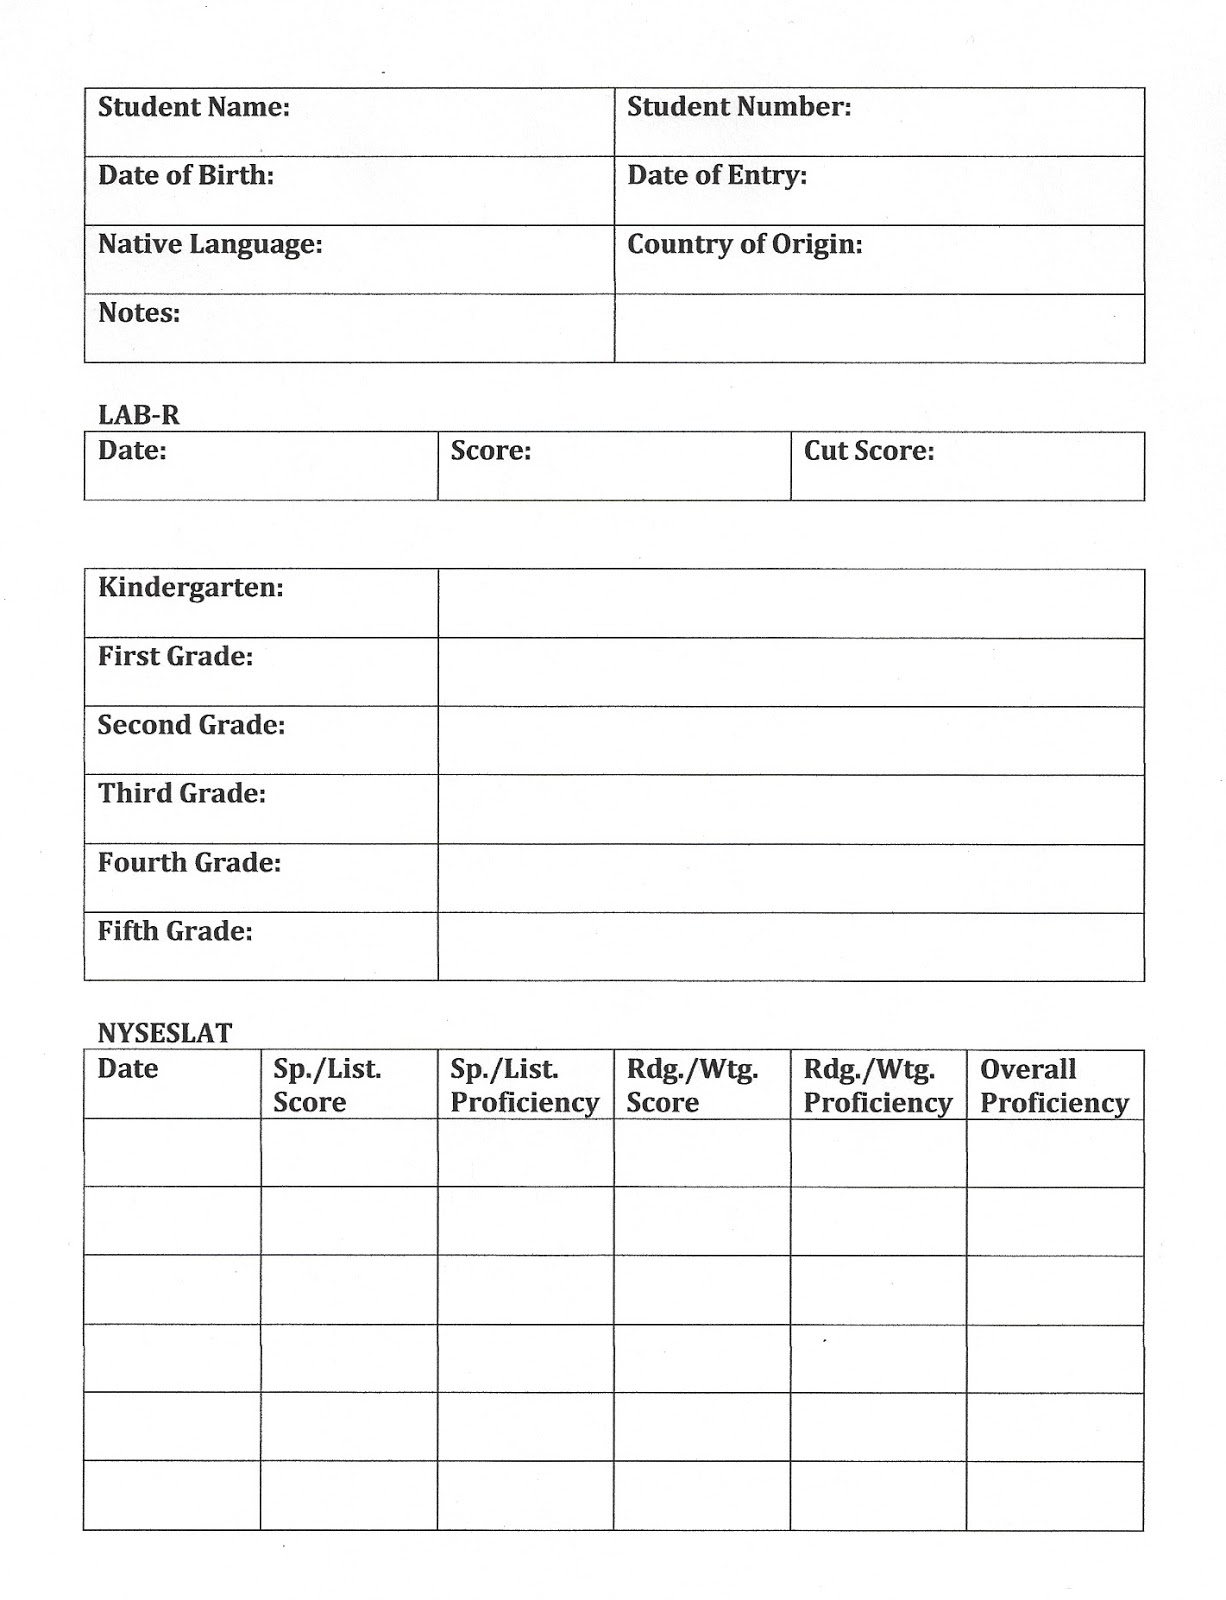 ESL Amplified: Student Record Sheets